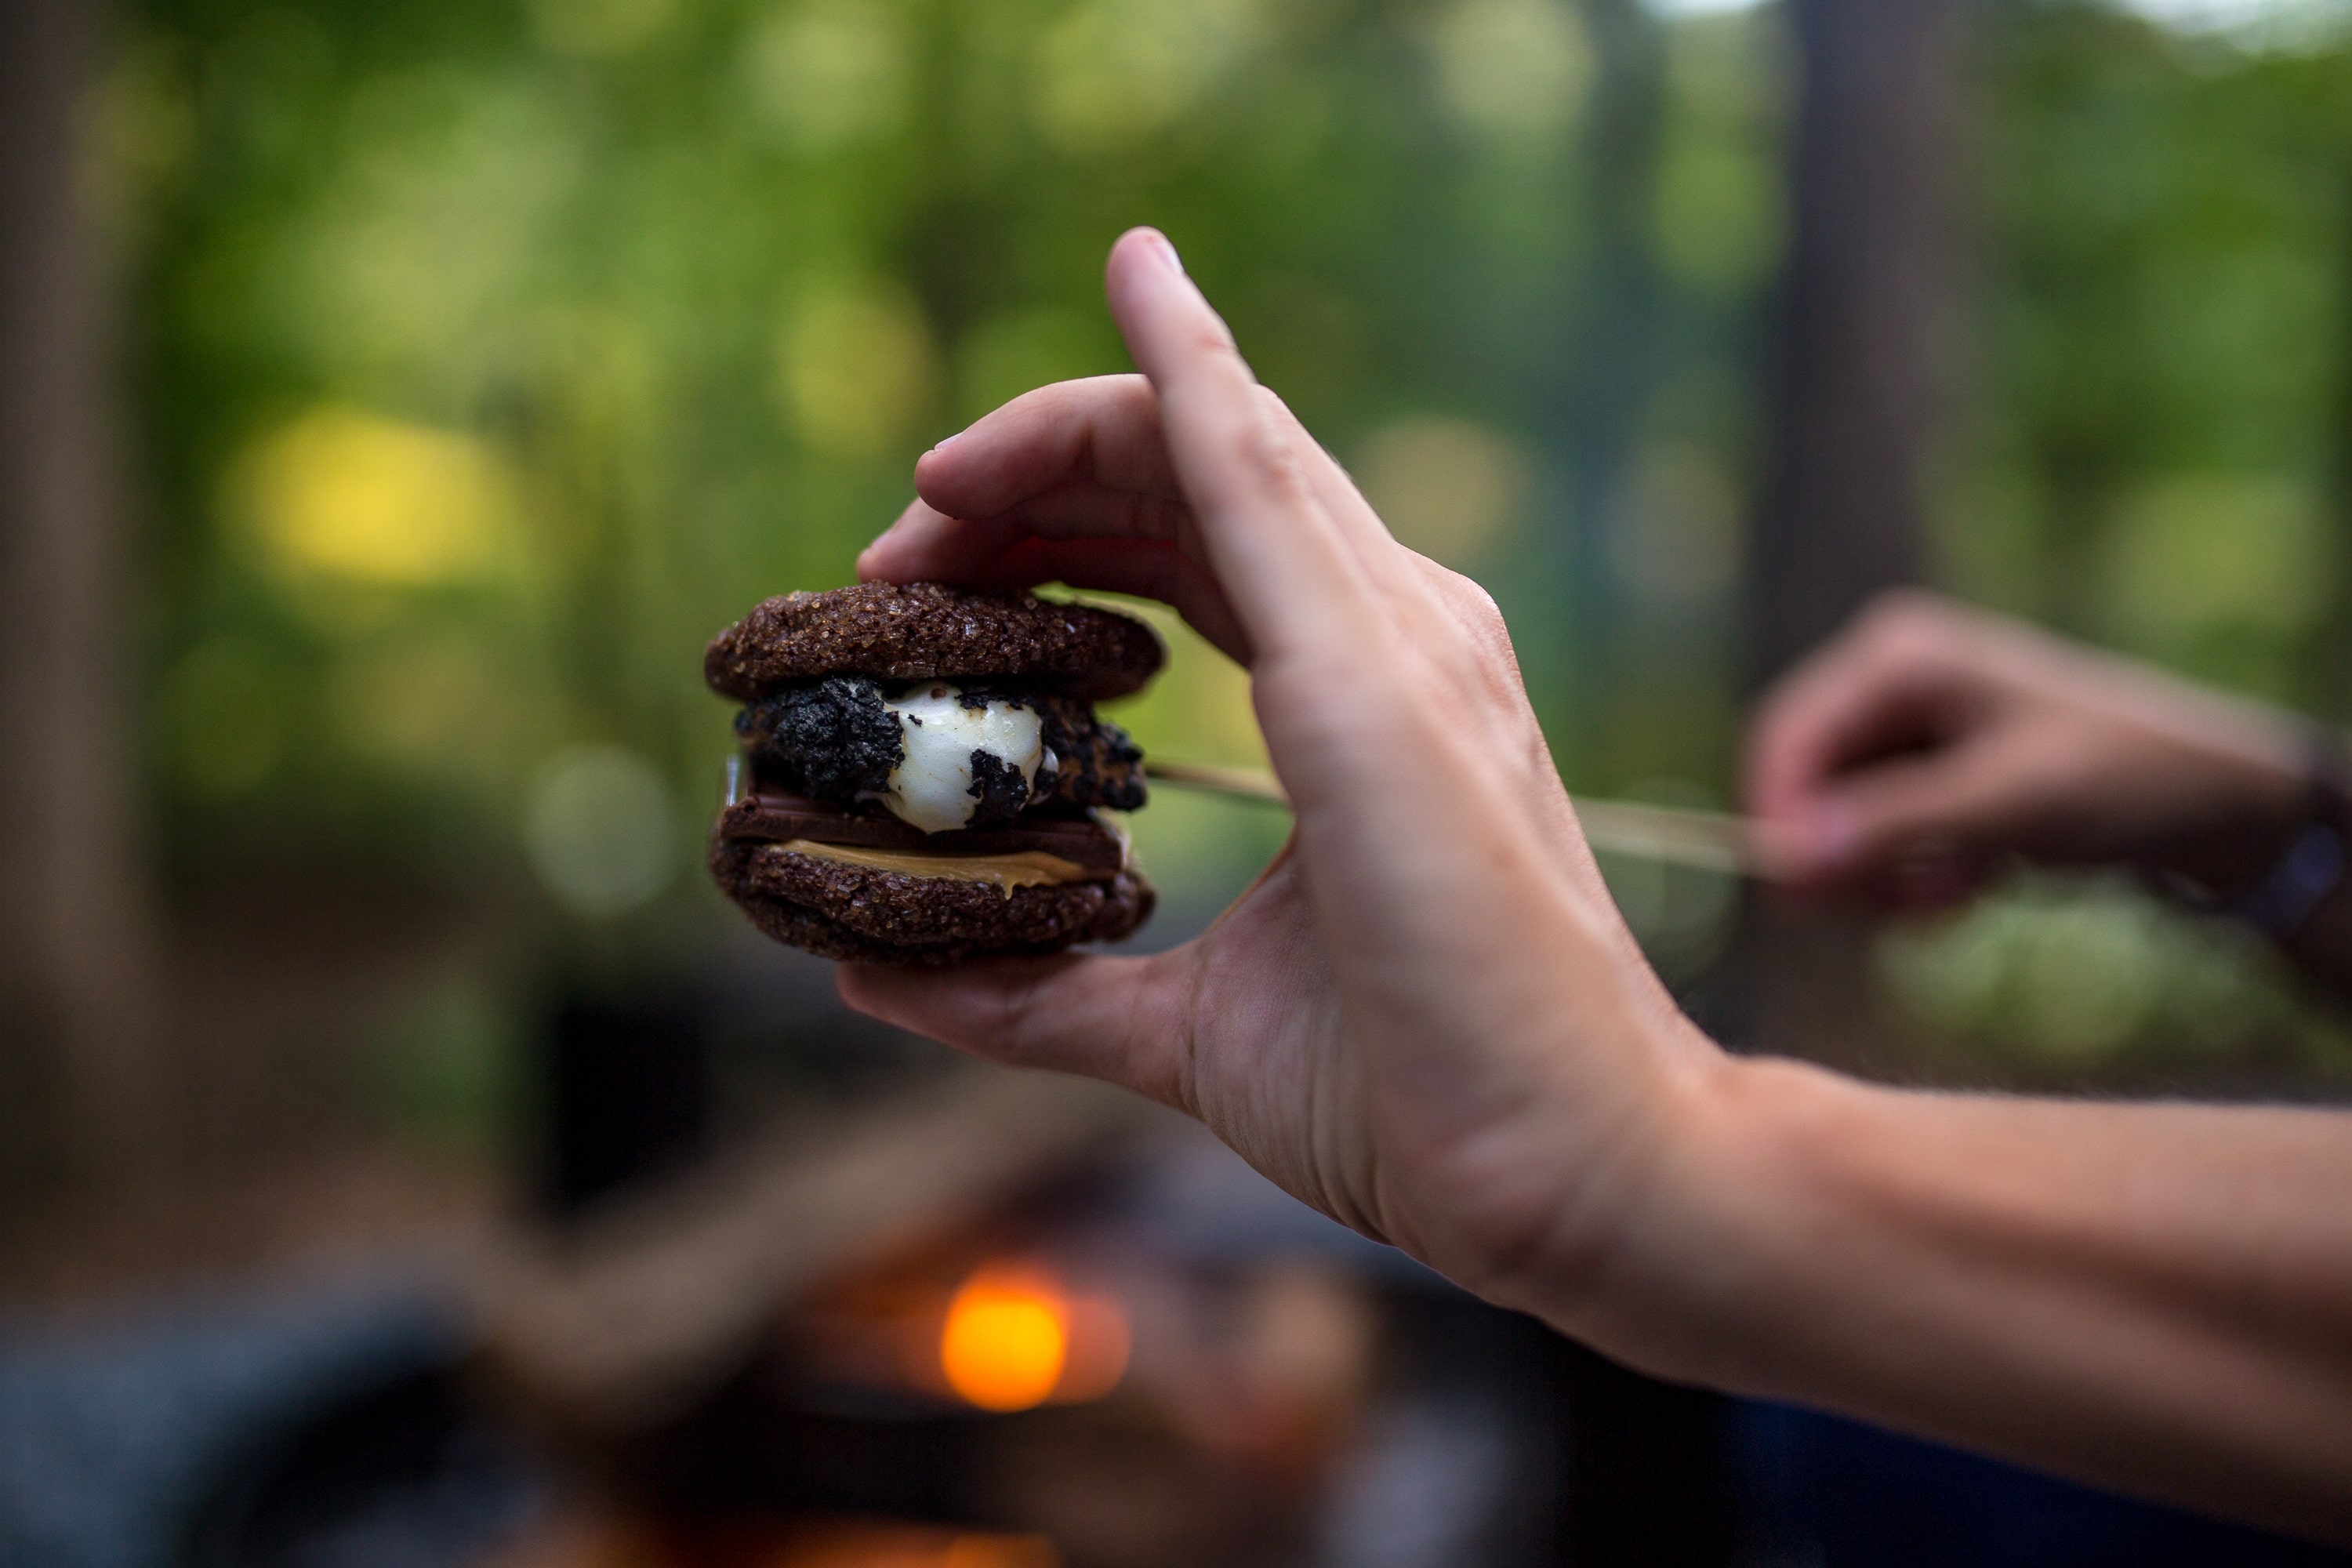 Step up your smores game with Chocolate Espresso cookies, rather than graham crackers